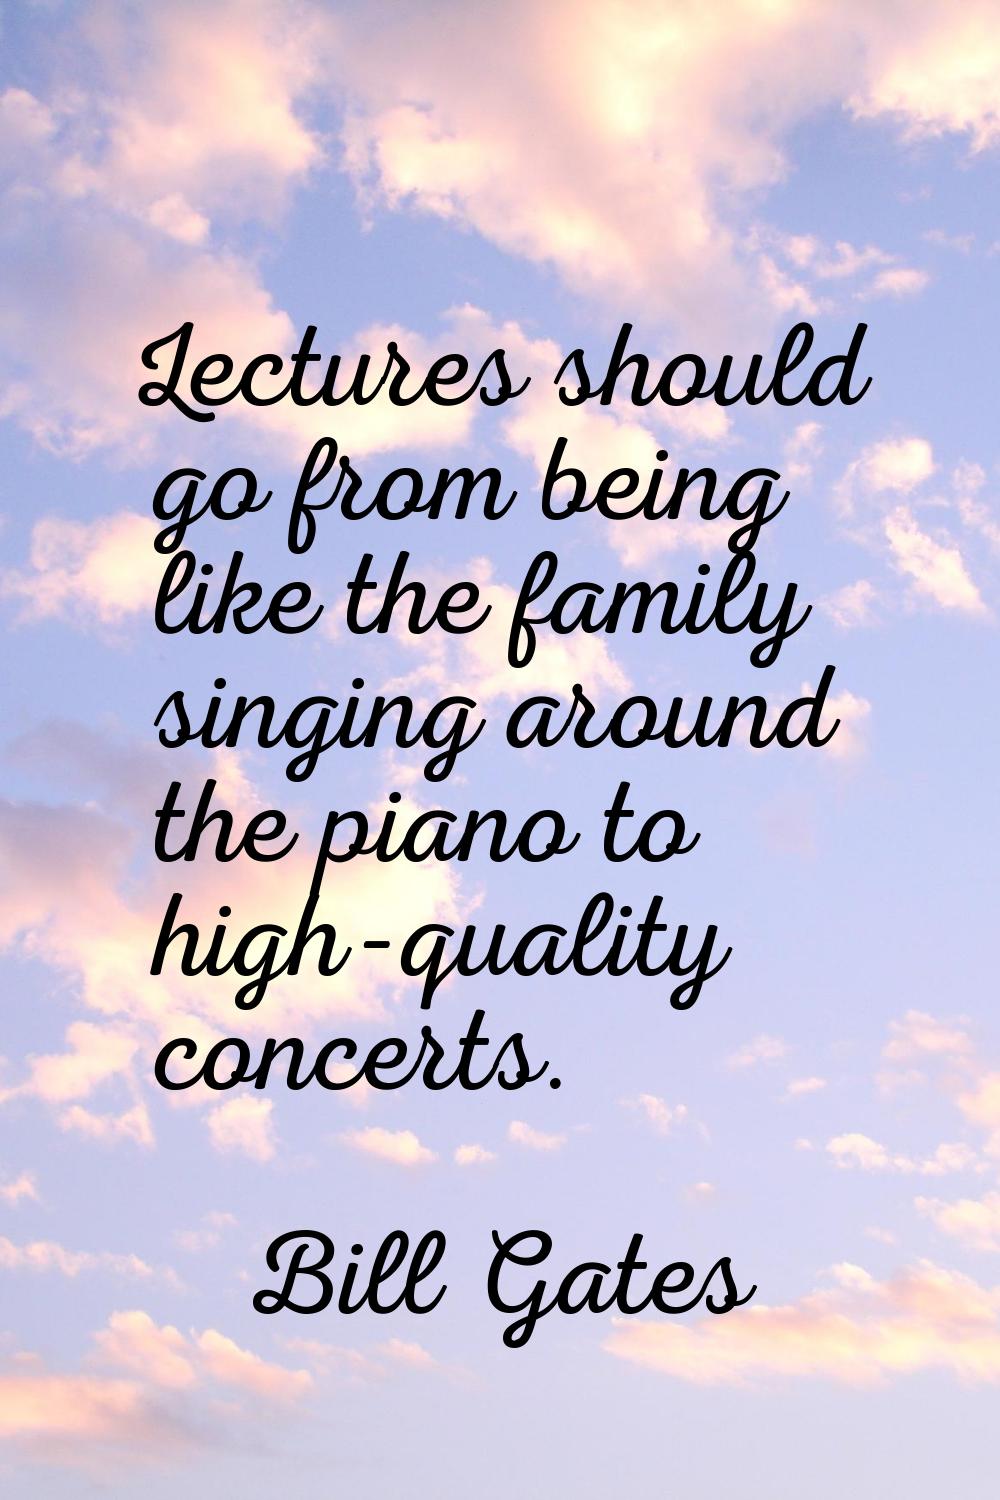 Lectures should go from being like the family singing around the piano to high-quality concerts.